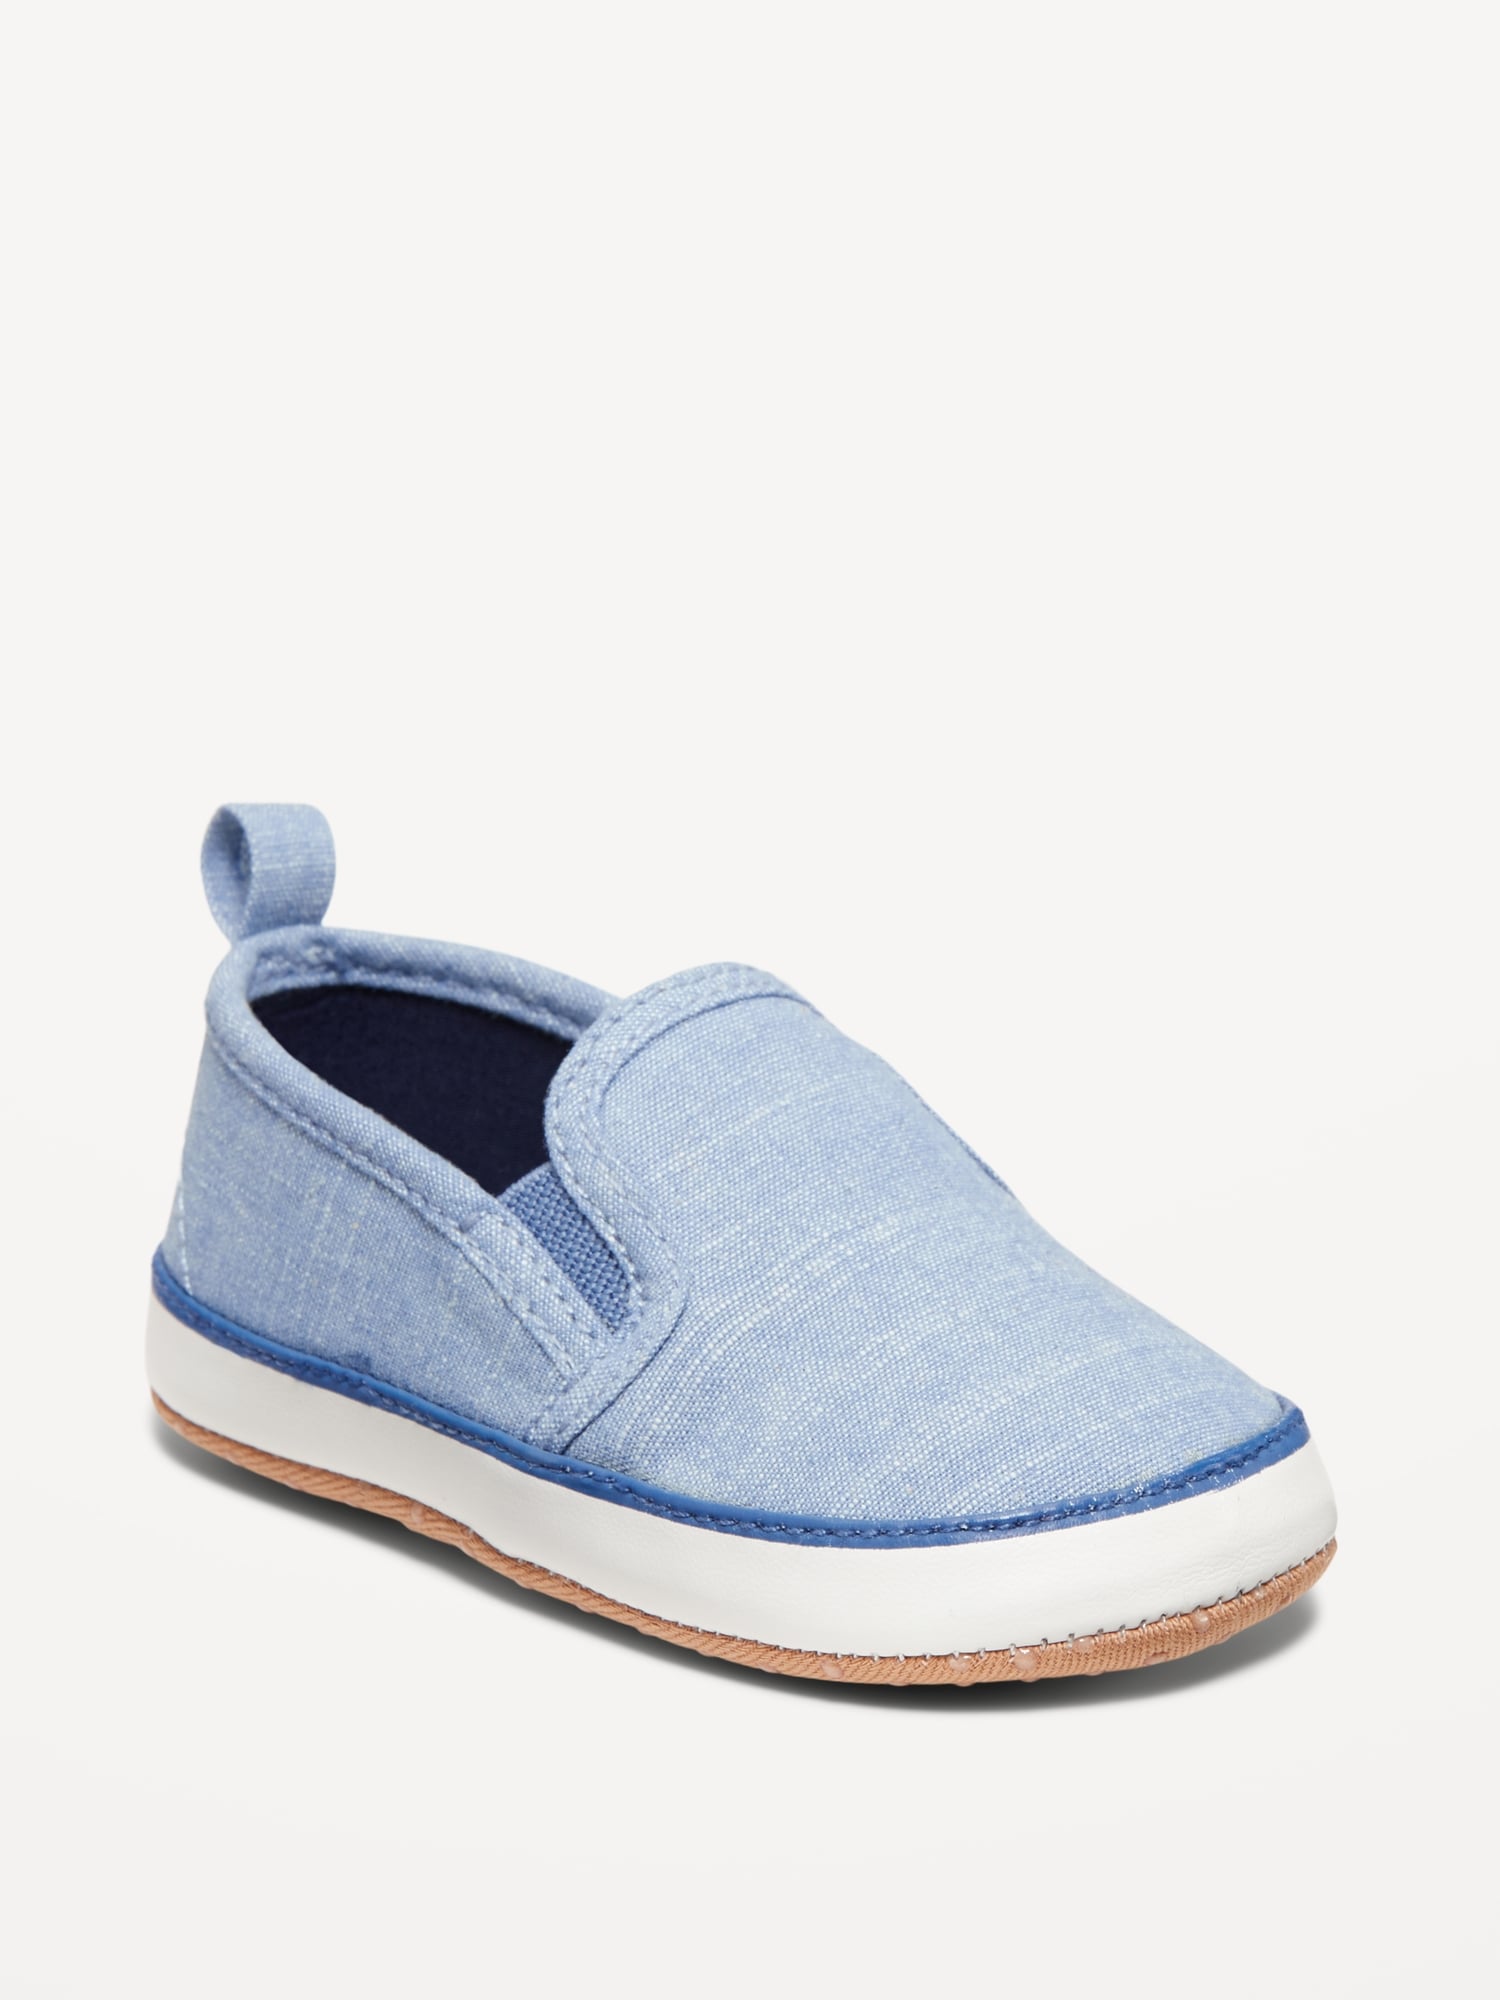 Old Navy Unisex Slip-On Sneakers for Baby blue. 1